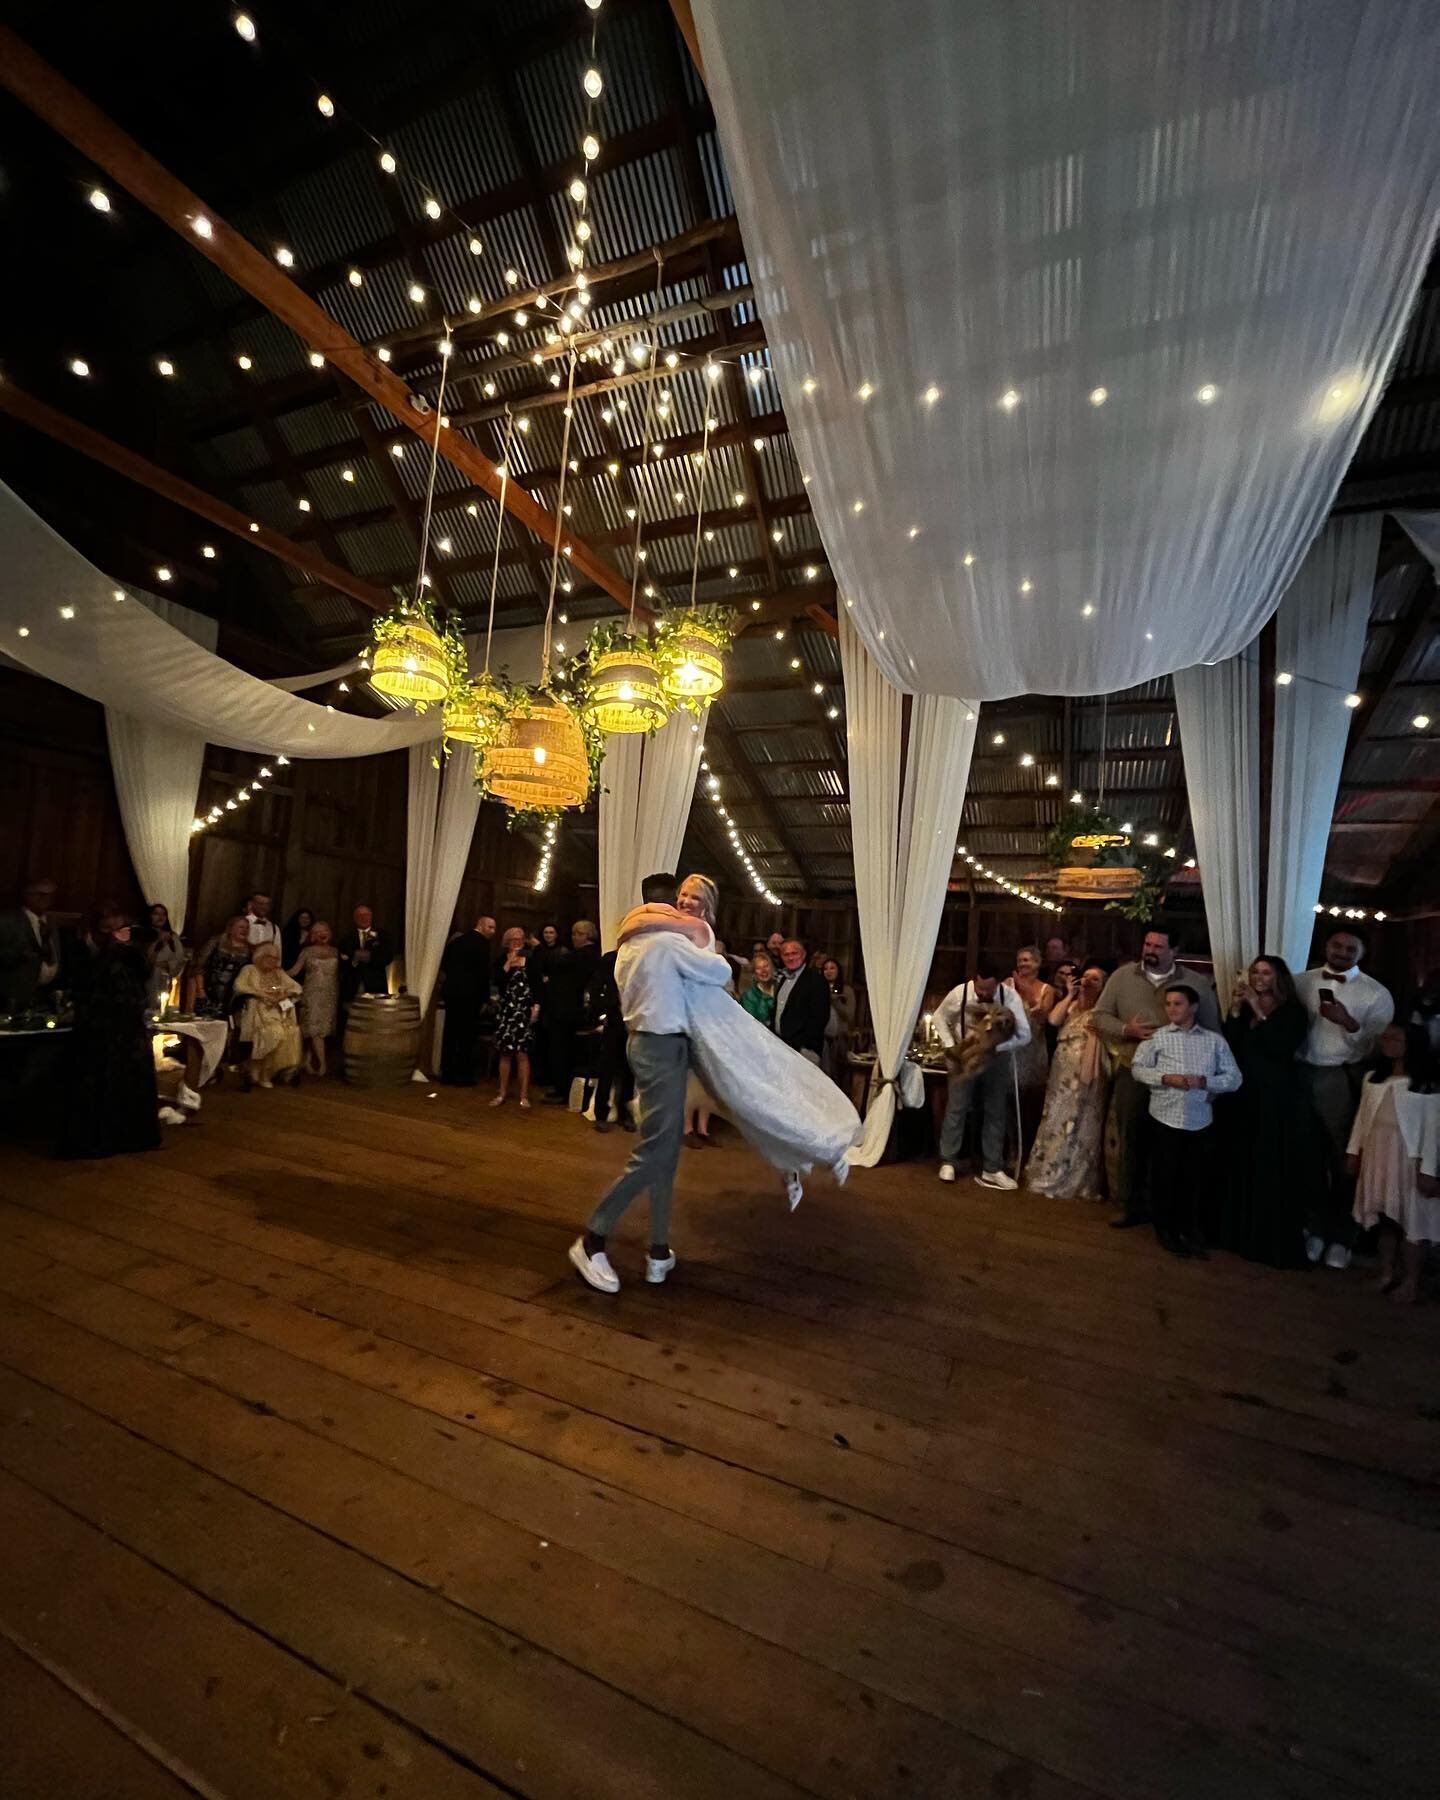 You&rsquo;ve followed Hadley &amp; Baidi&rsquo;s journey to their first dance, so here&rsquo;s a sneak peek into their final performance 🤩

Stay tuned for some epic video footage!! ✨

📸: @hollyshankland

#wedding #firstdance #weddingdance #danceles